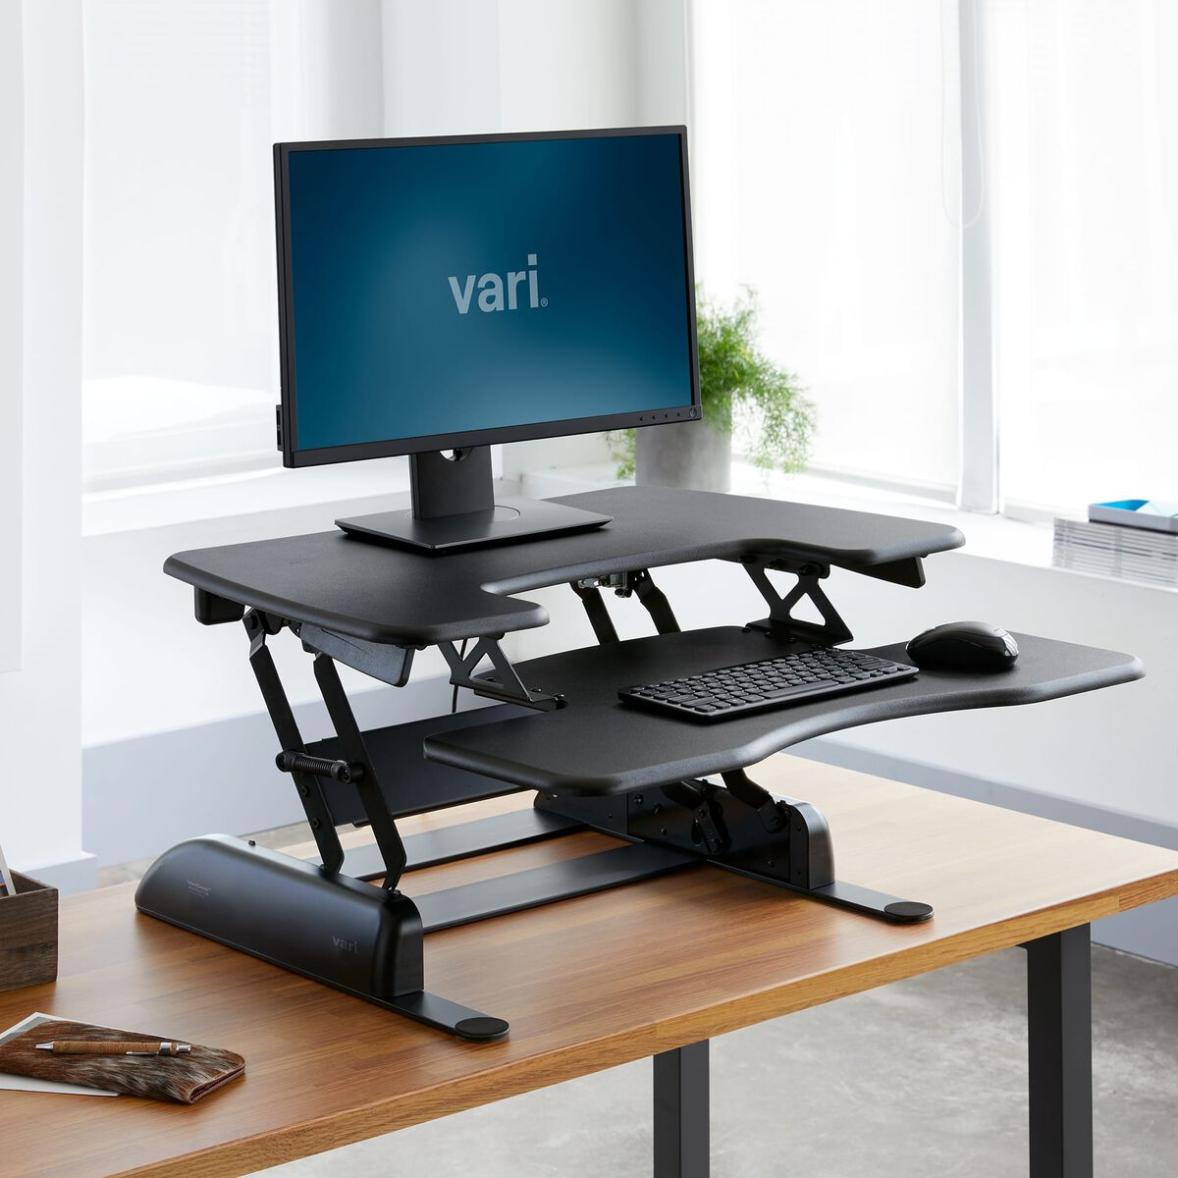 How Do I Choose the Right Standing Desk or Converter for Me?